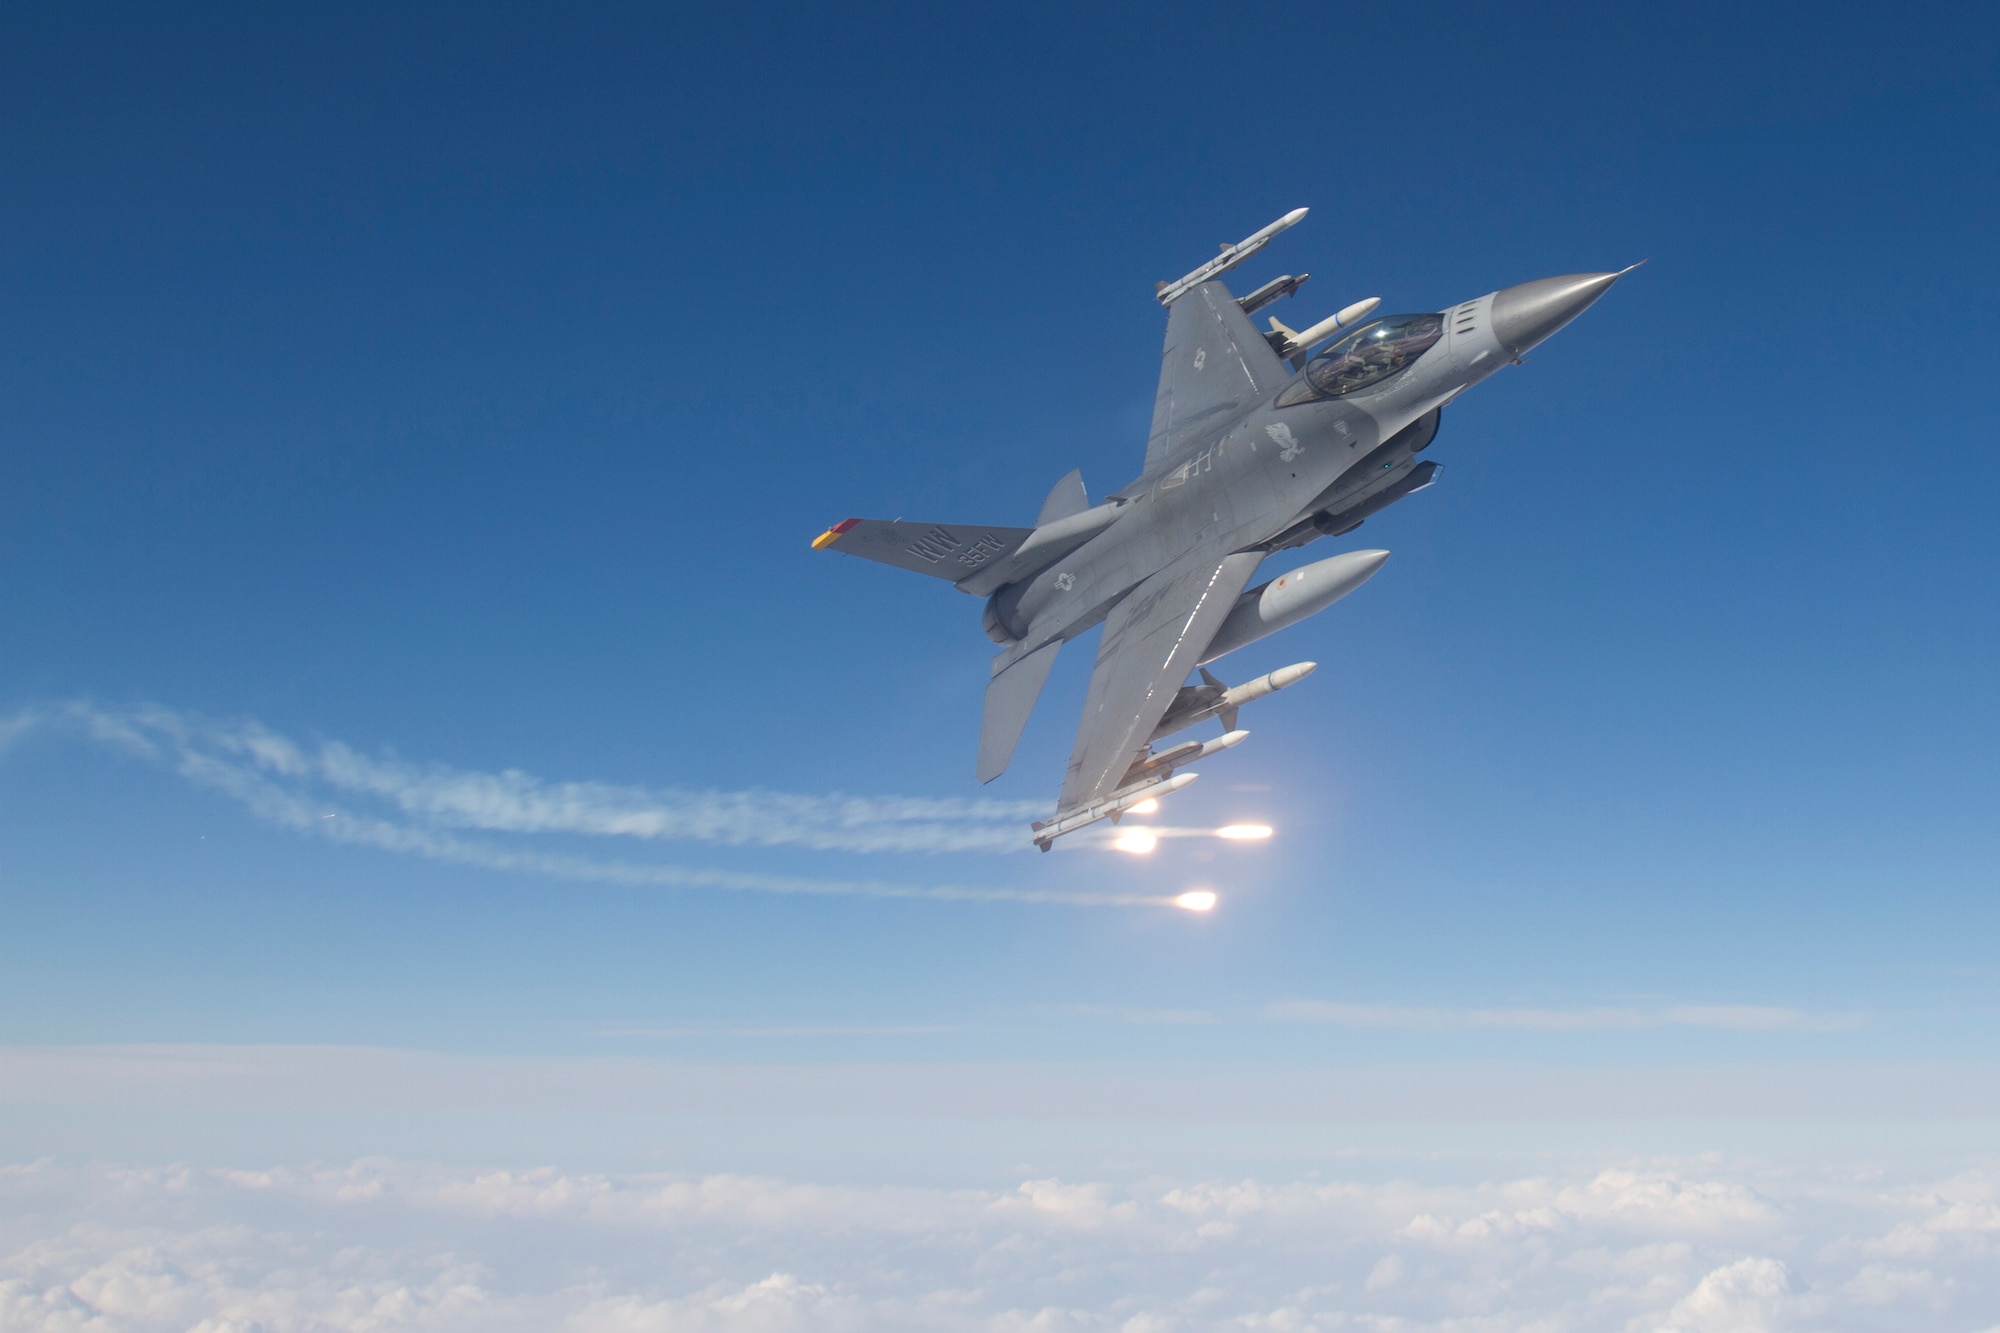 An F-16 Fighting Falcon with the 35th Fighter Wing conducts training over Misawa Air Base, Japan, Feb. 14, 2013. A team effort between the U.S. Air Force and the Japan Ground Self-Defense Force has provided enhanced simulated training in the Misawa area. (Courtesy photo/released)